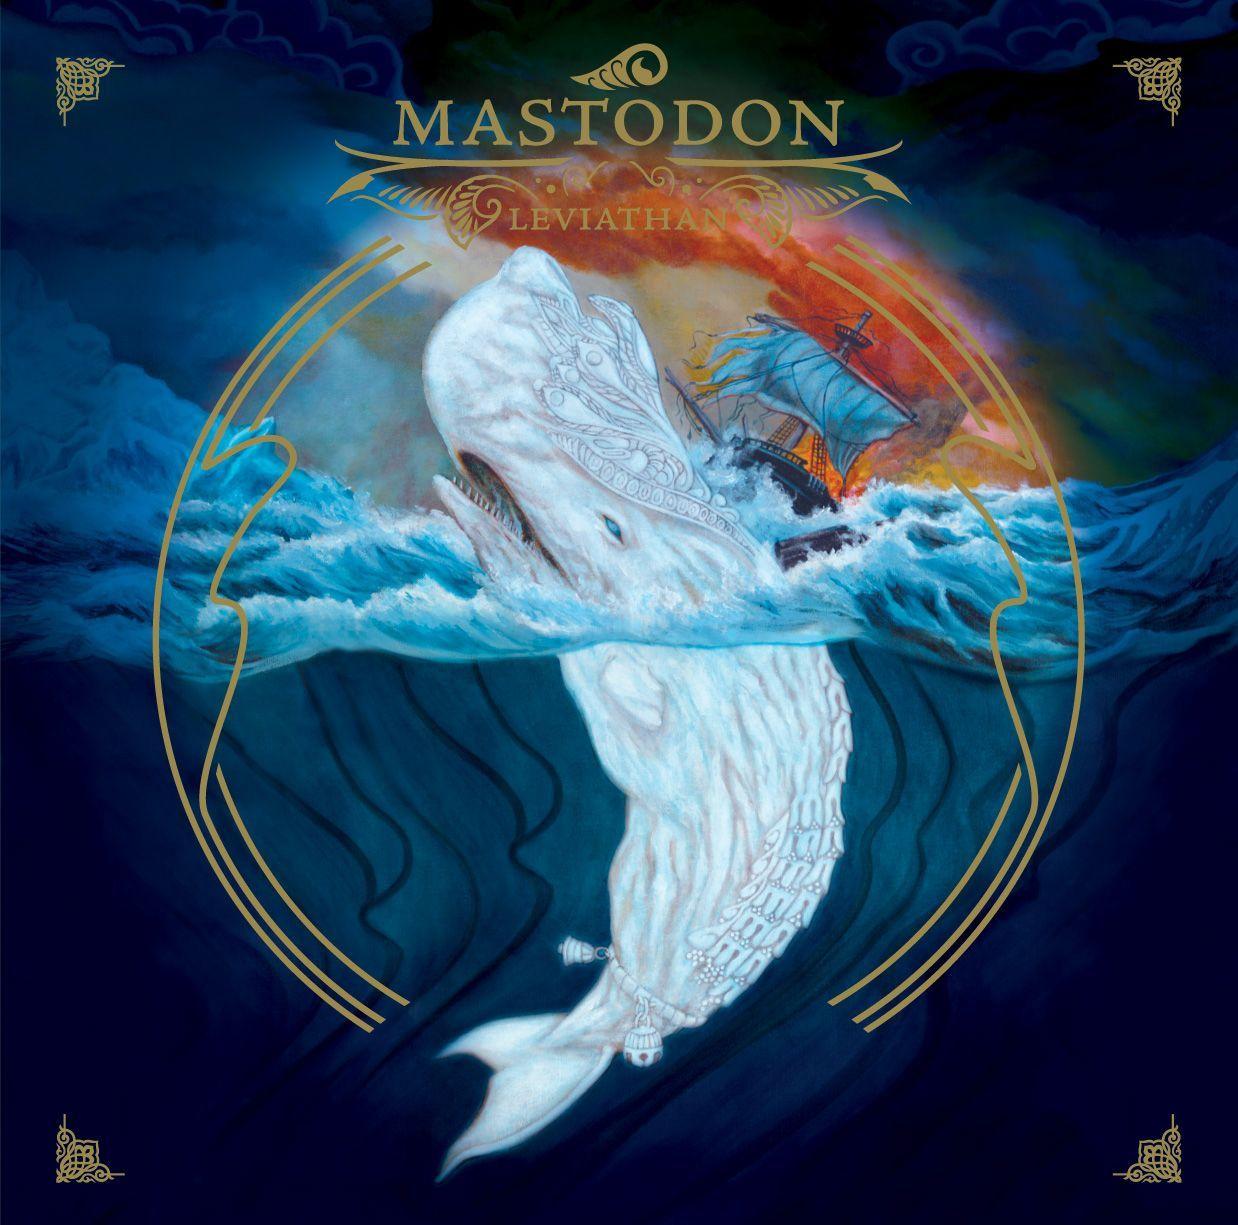 Mastodon Leviathan Cover.god I love this album and the art too